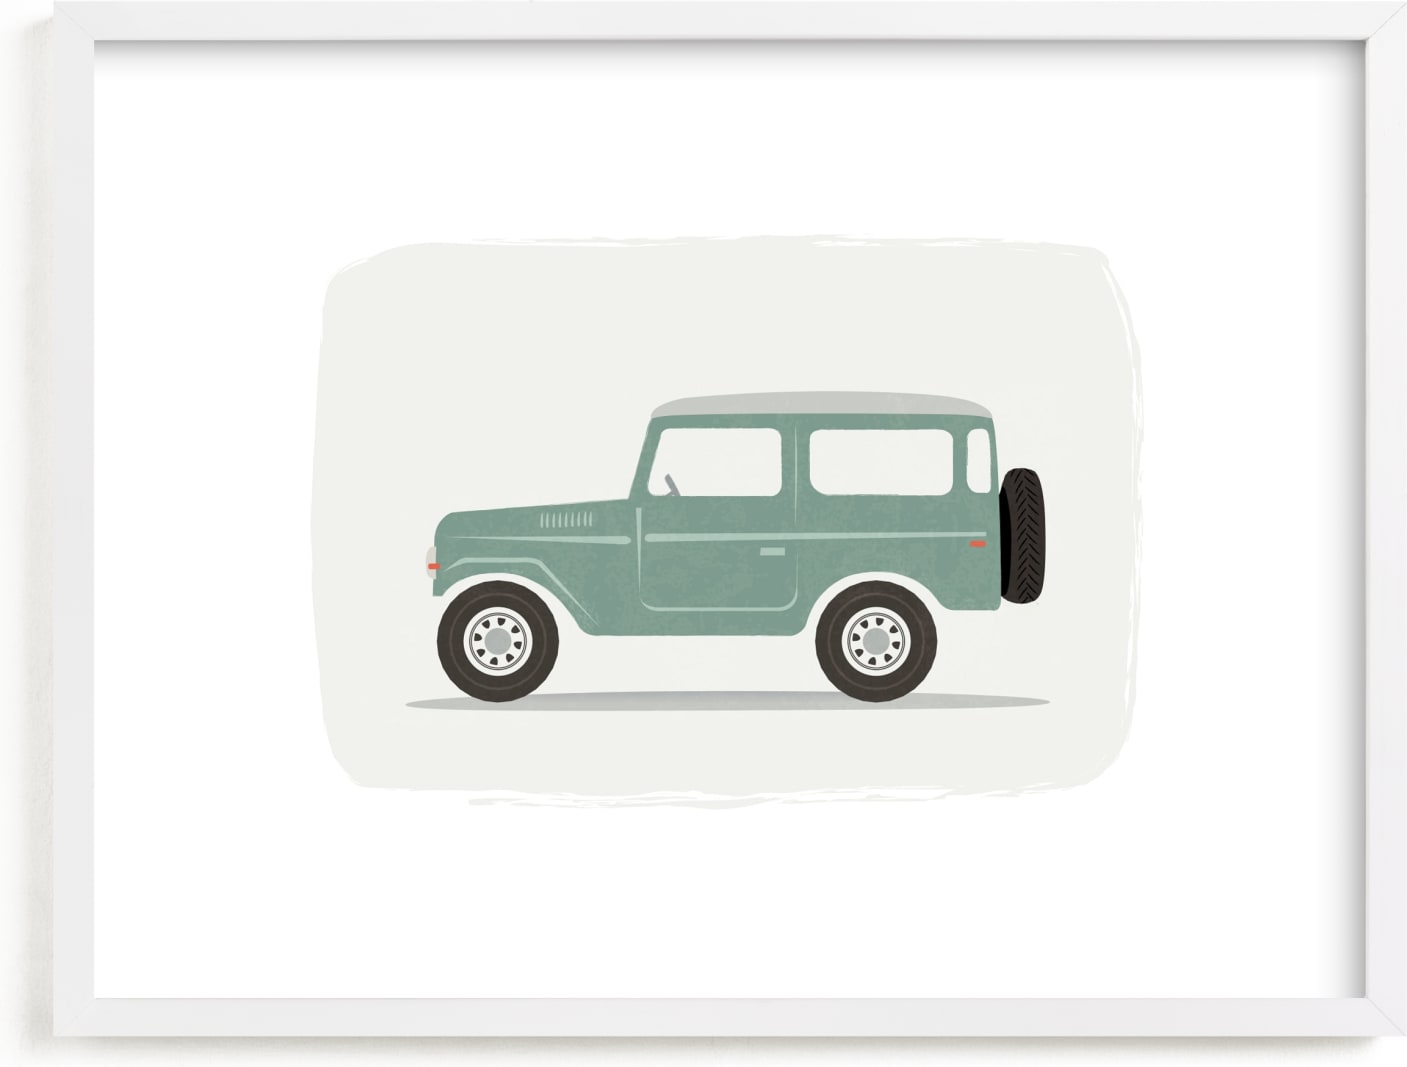 This is a grey art by Karidy Walker called Vintage Land Cruiser.